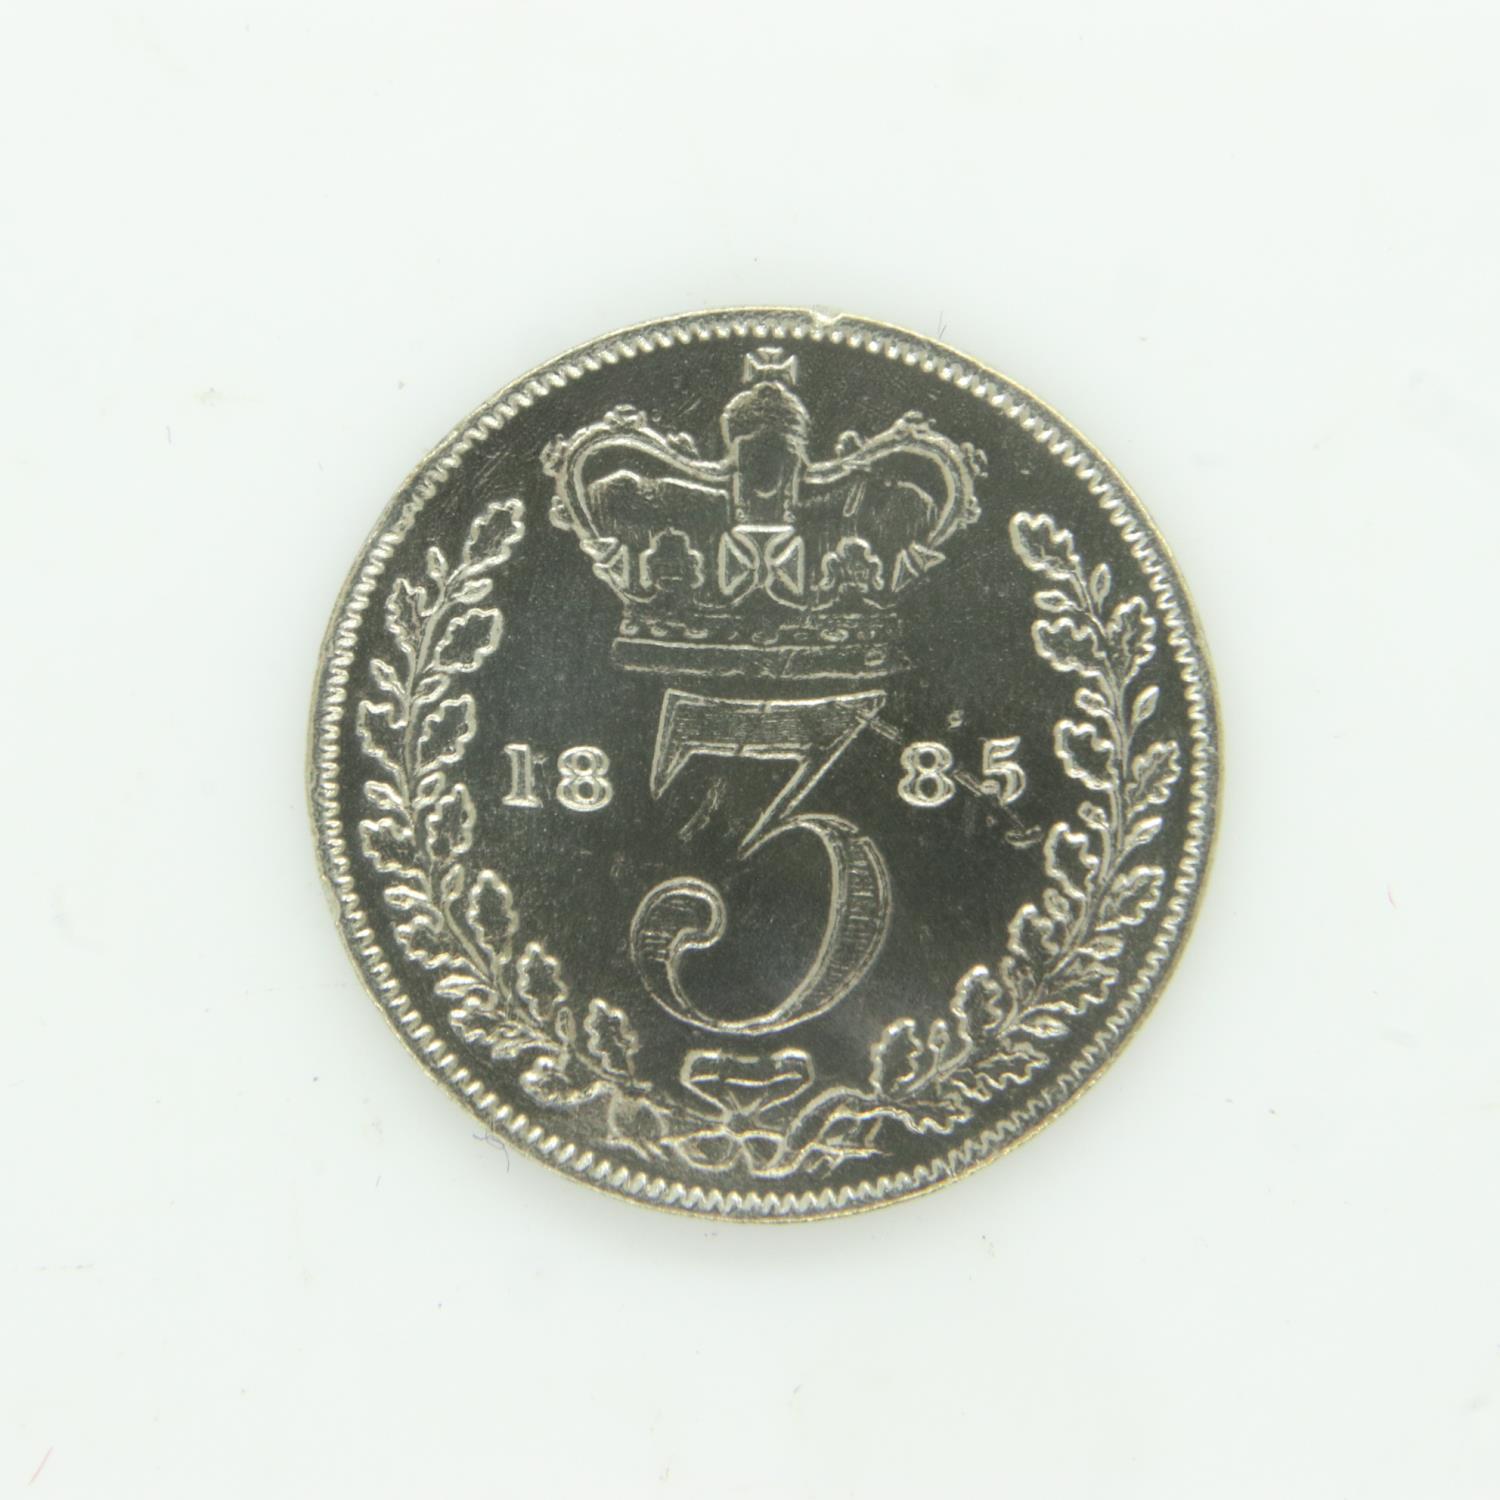 1885 silver threepence of Queen Victoria - aVF grade. UK P&P Group 0 (£6+VAT for the first lot